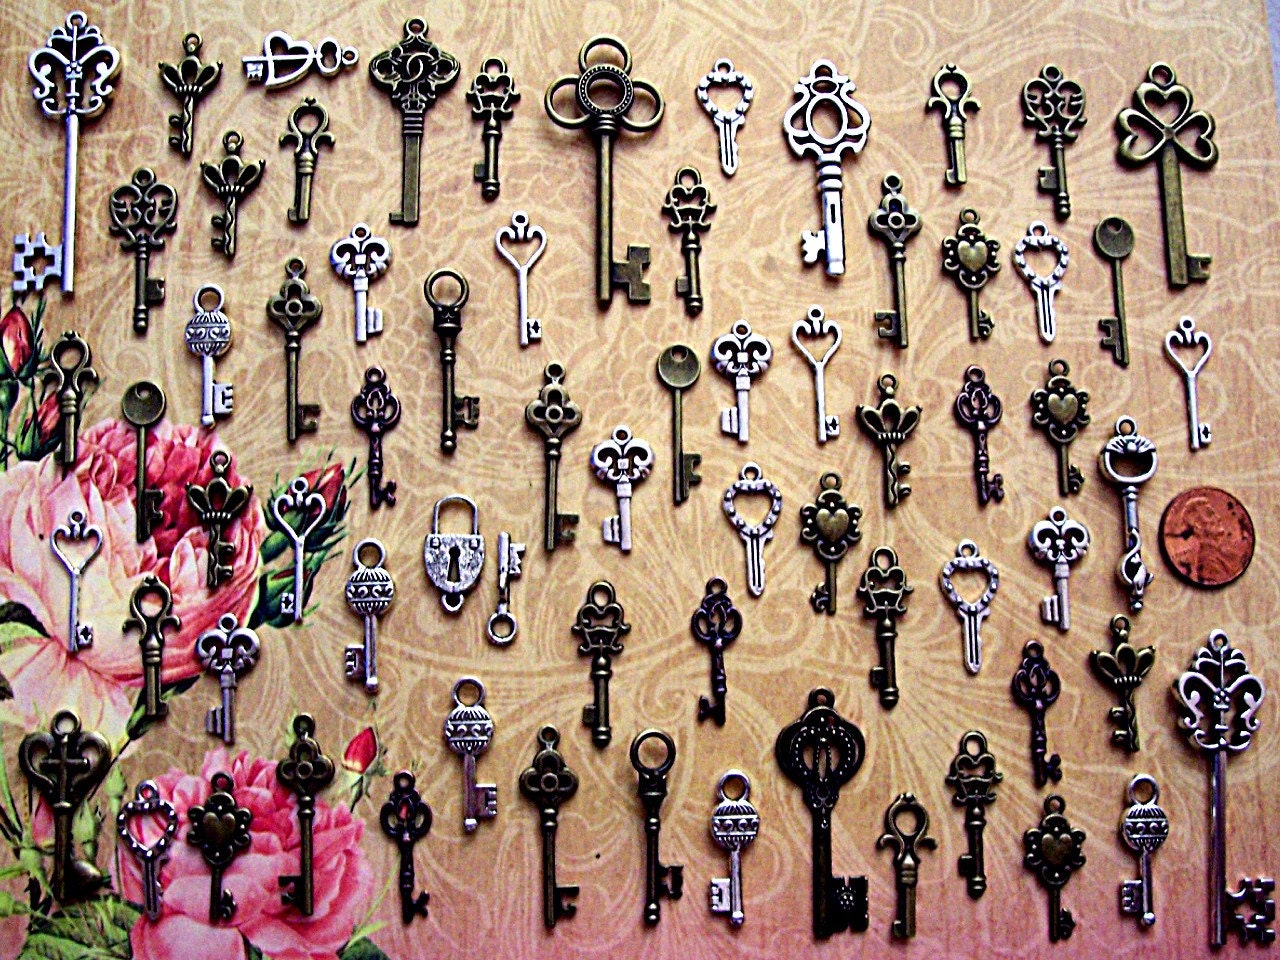 62 New Bulk Lot Skeleton Keys Charms Jewelry Steampunk Wedding Beads Supplies Pendant Collection Reproduction Vintage Antique Look Crafts